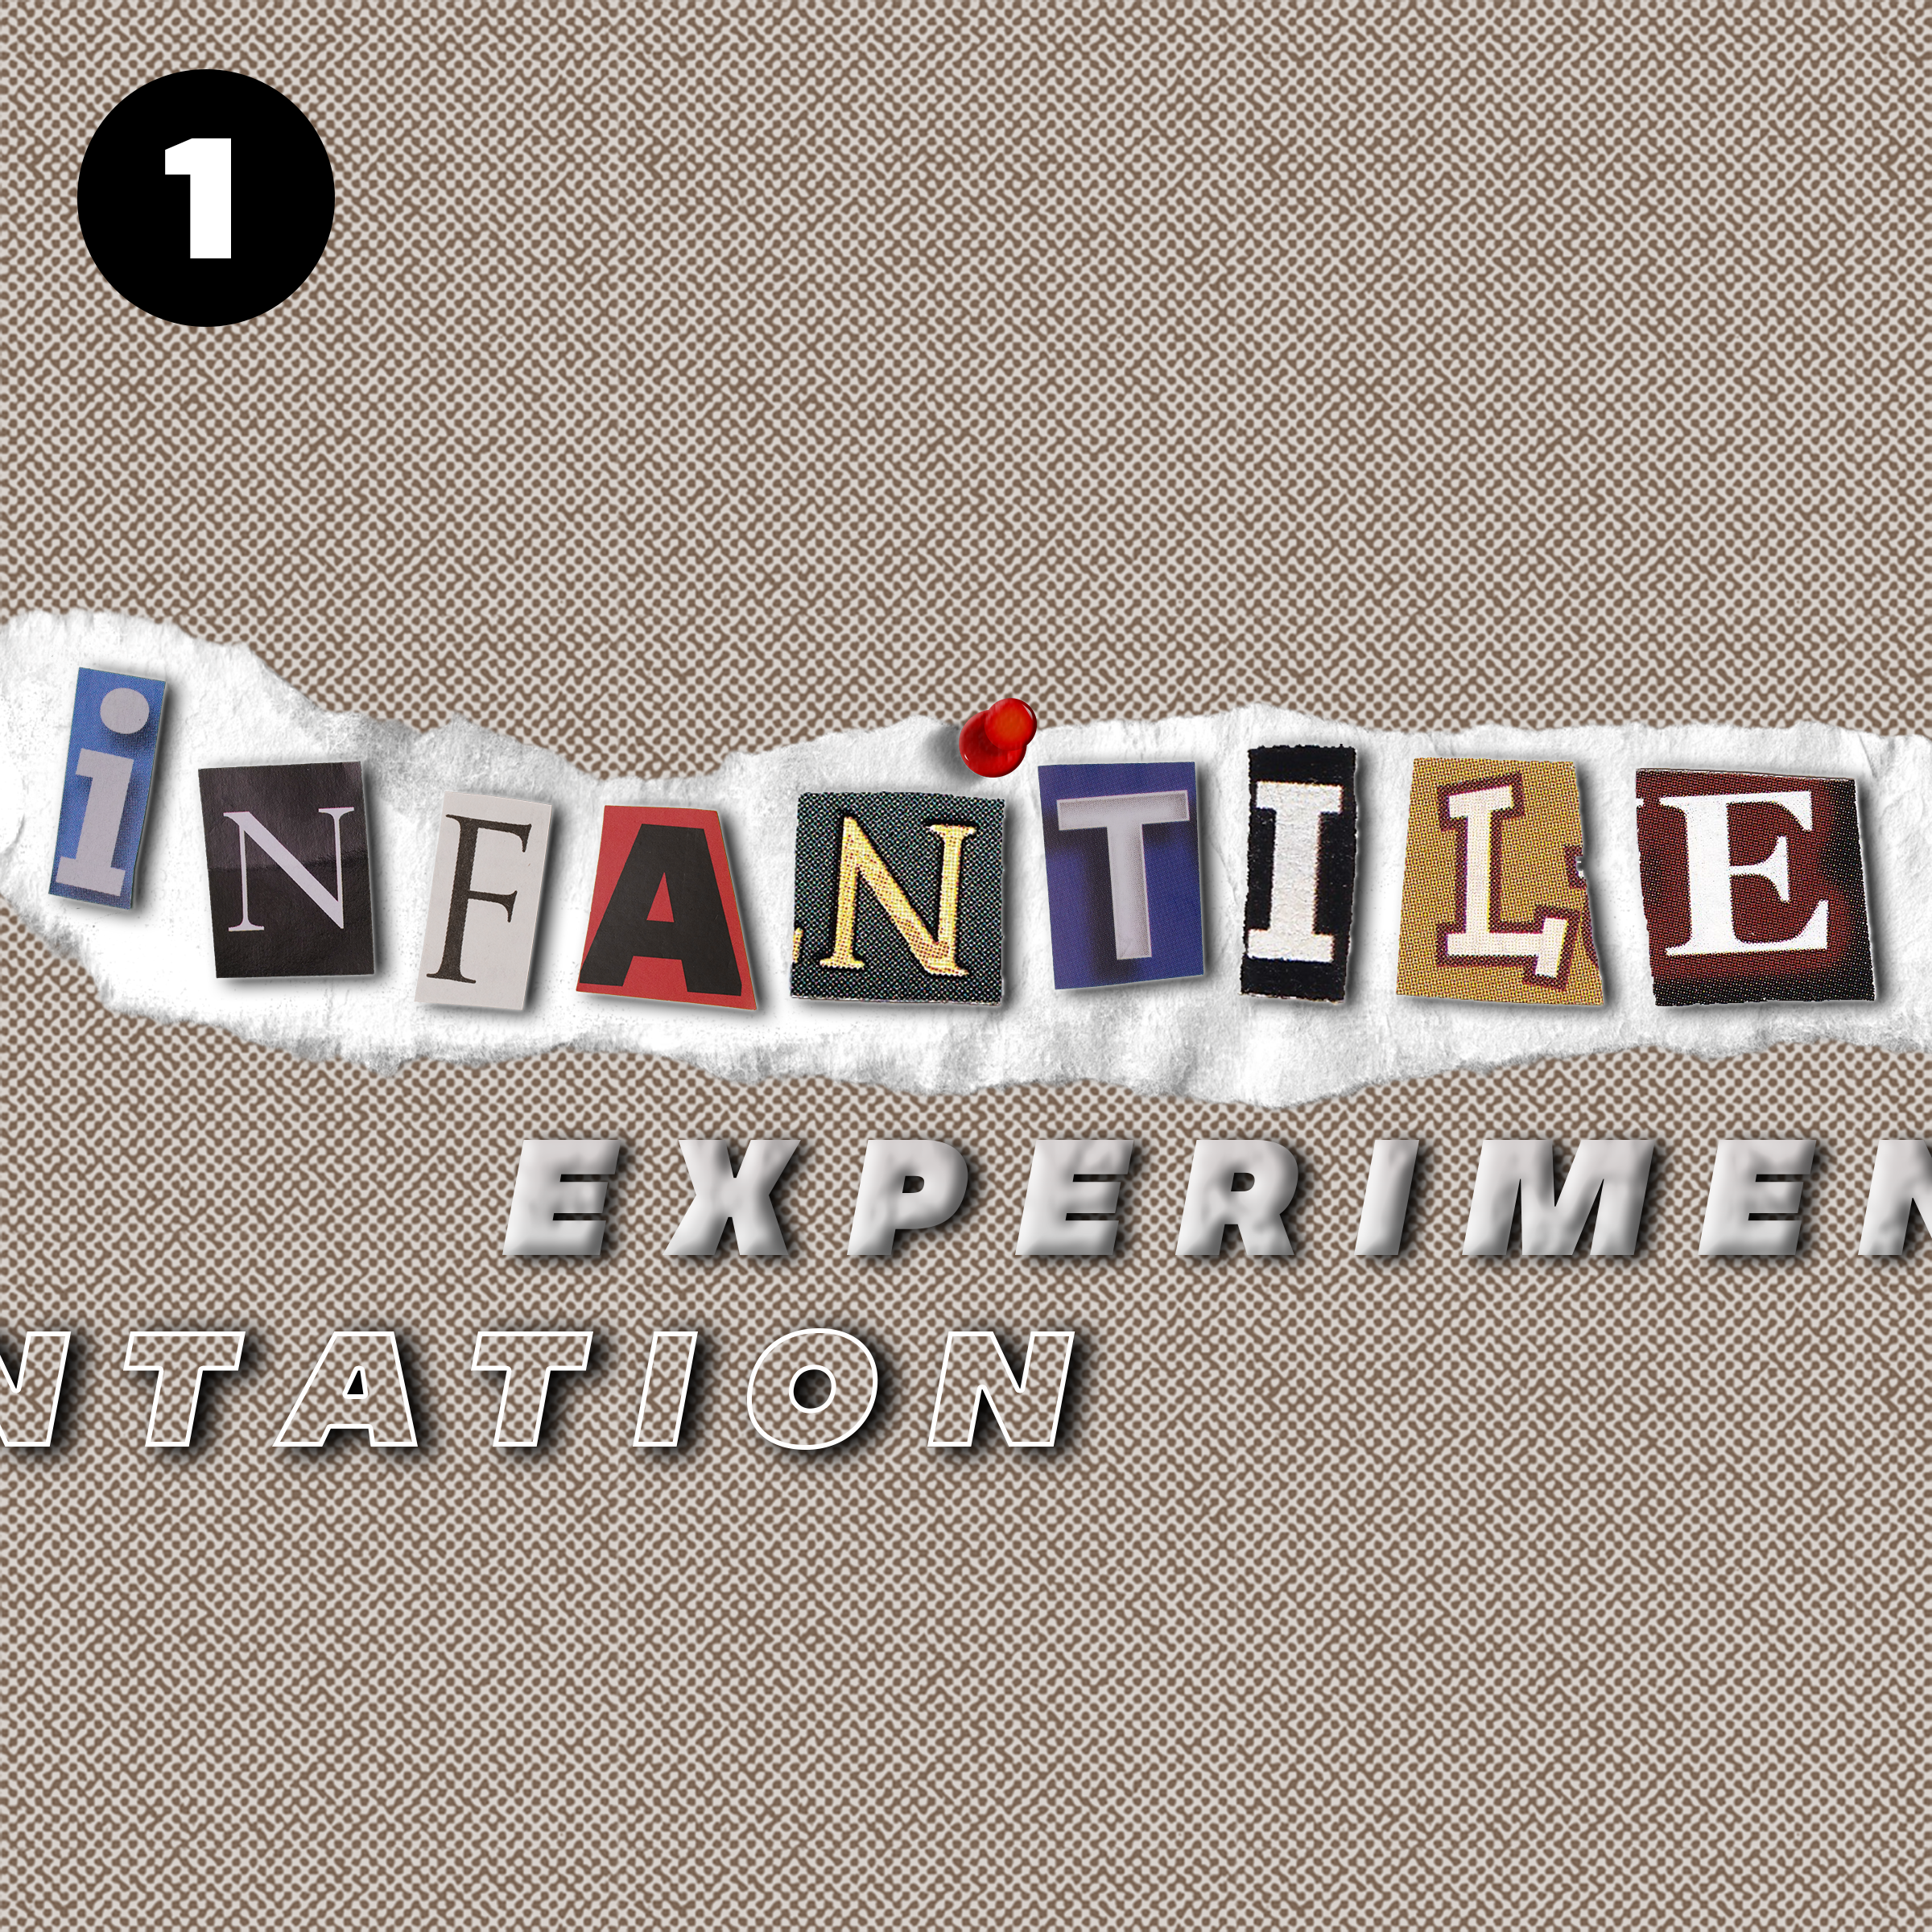 cover for my zine titled 'infantile experiemntation'